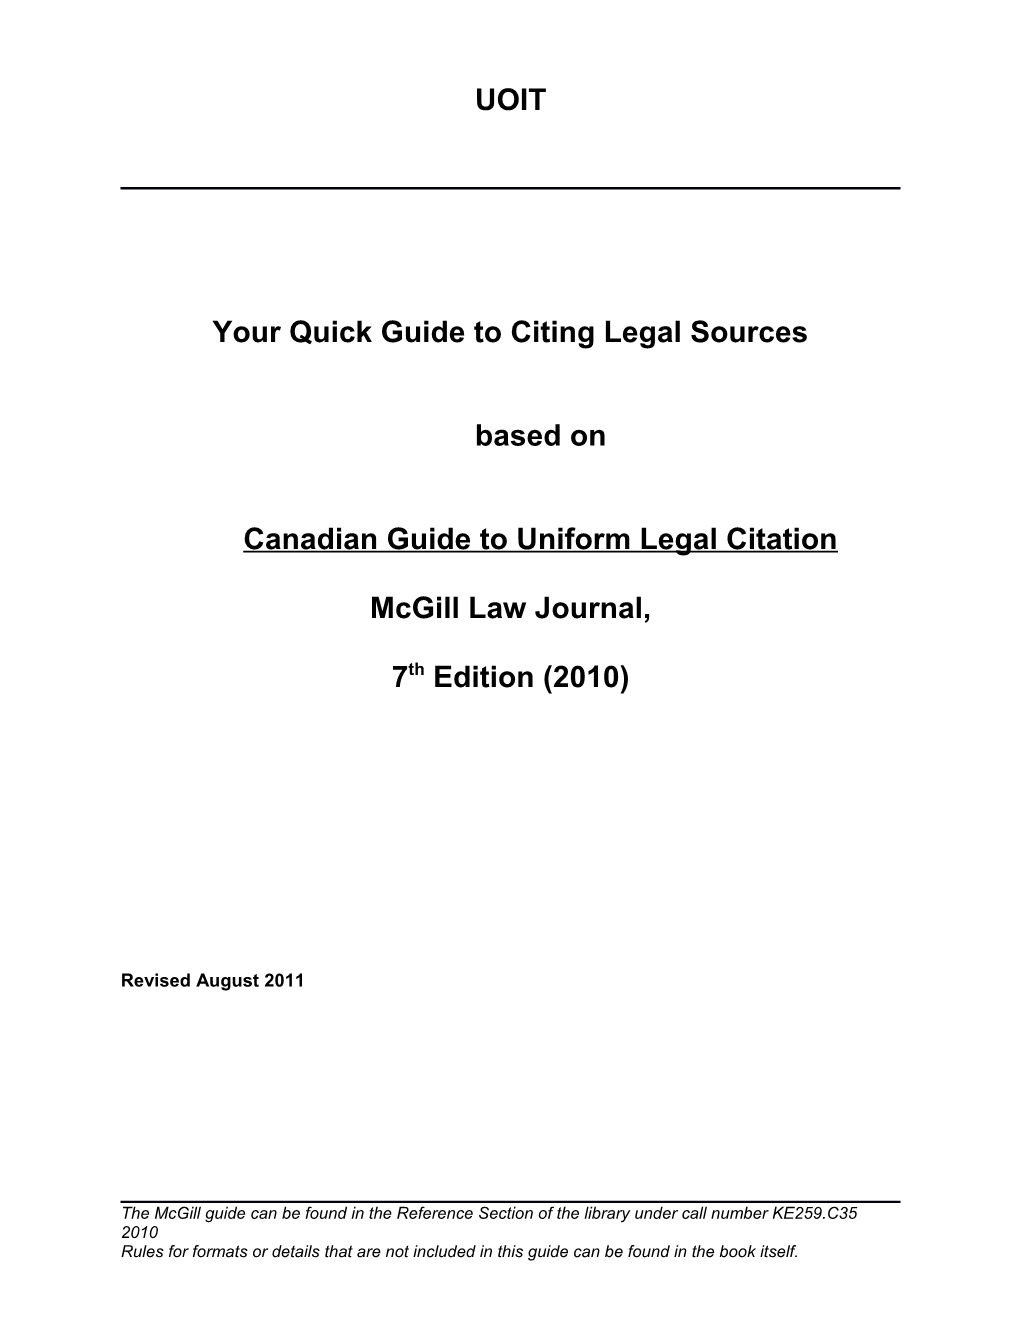 Your Quick Guide to Citing Legal Sources